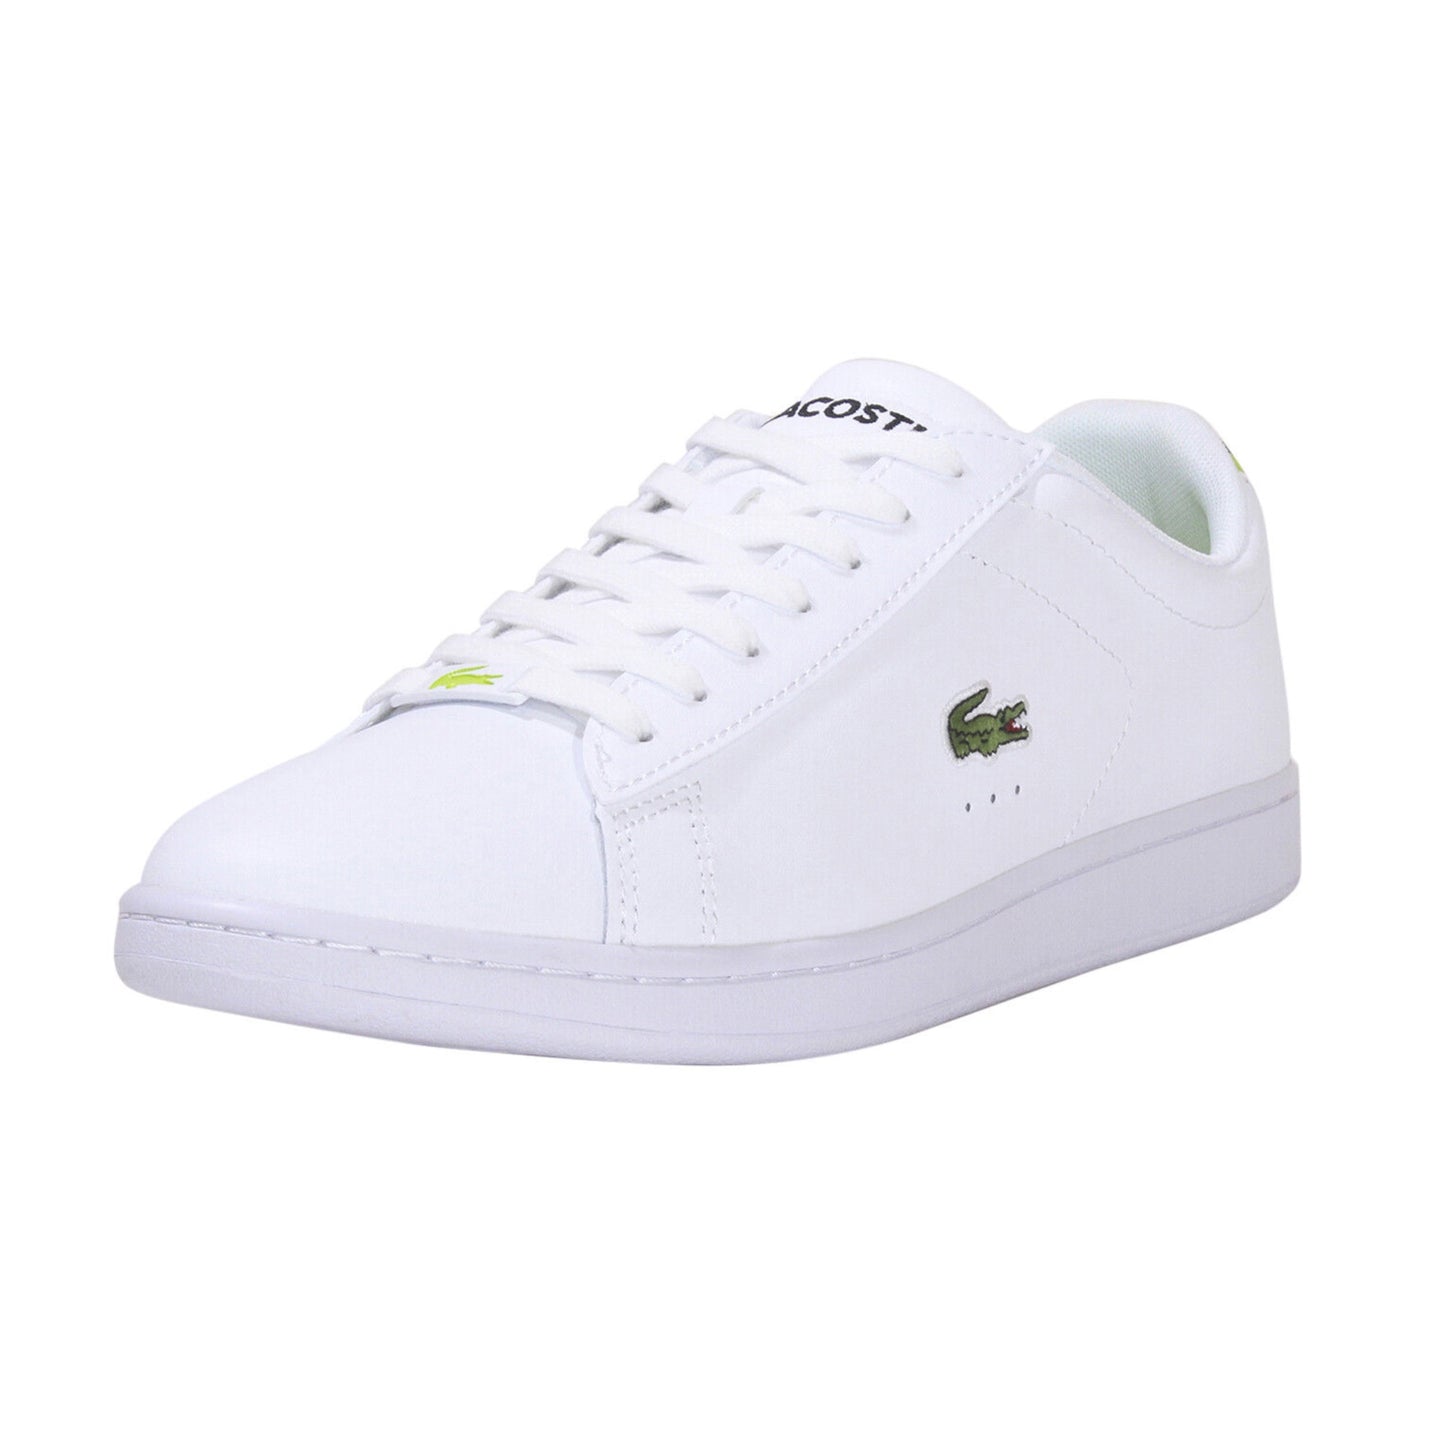 Carnaby Evo 222 White Blue By Lacoste